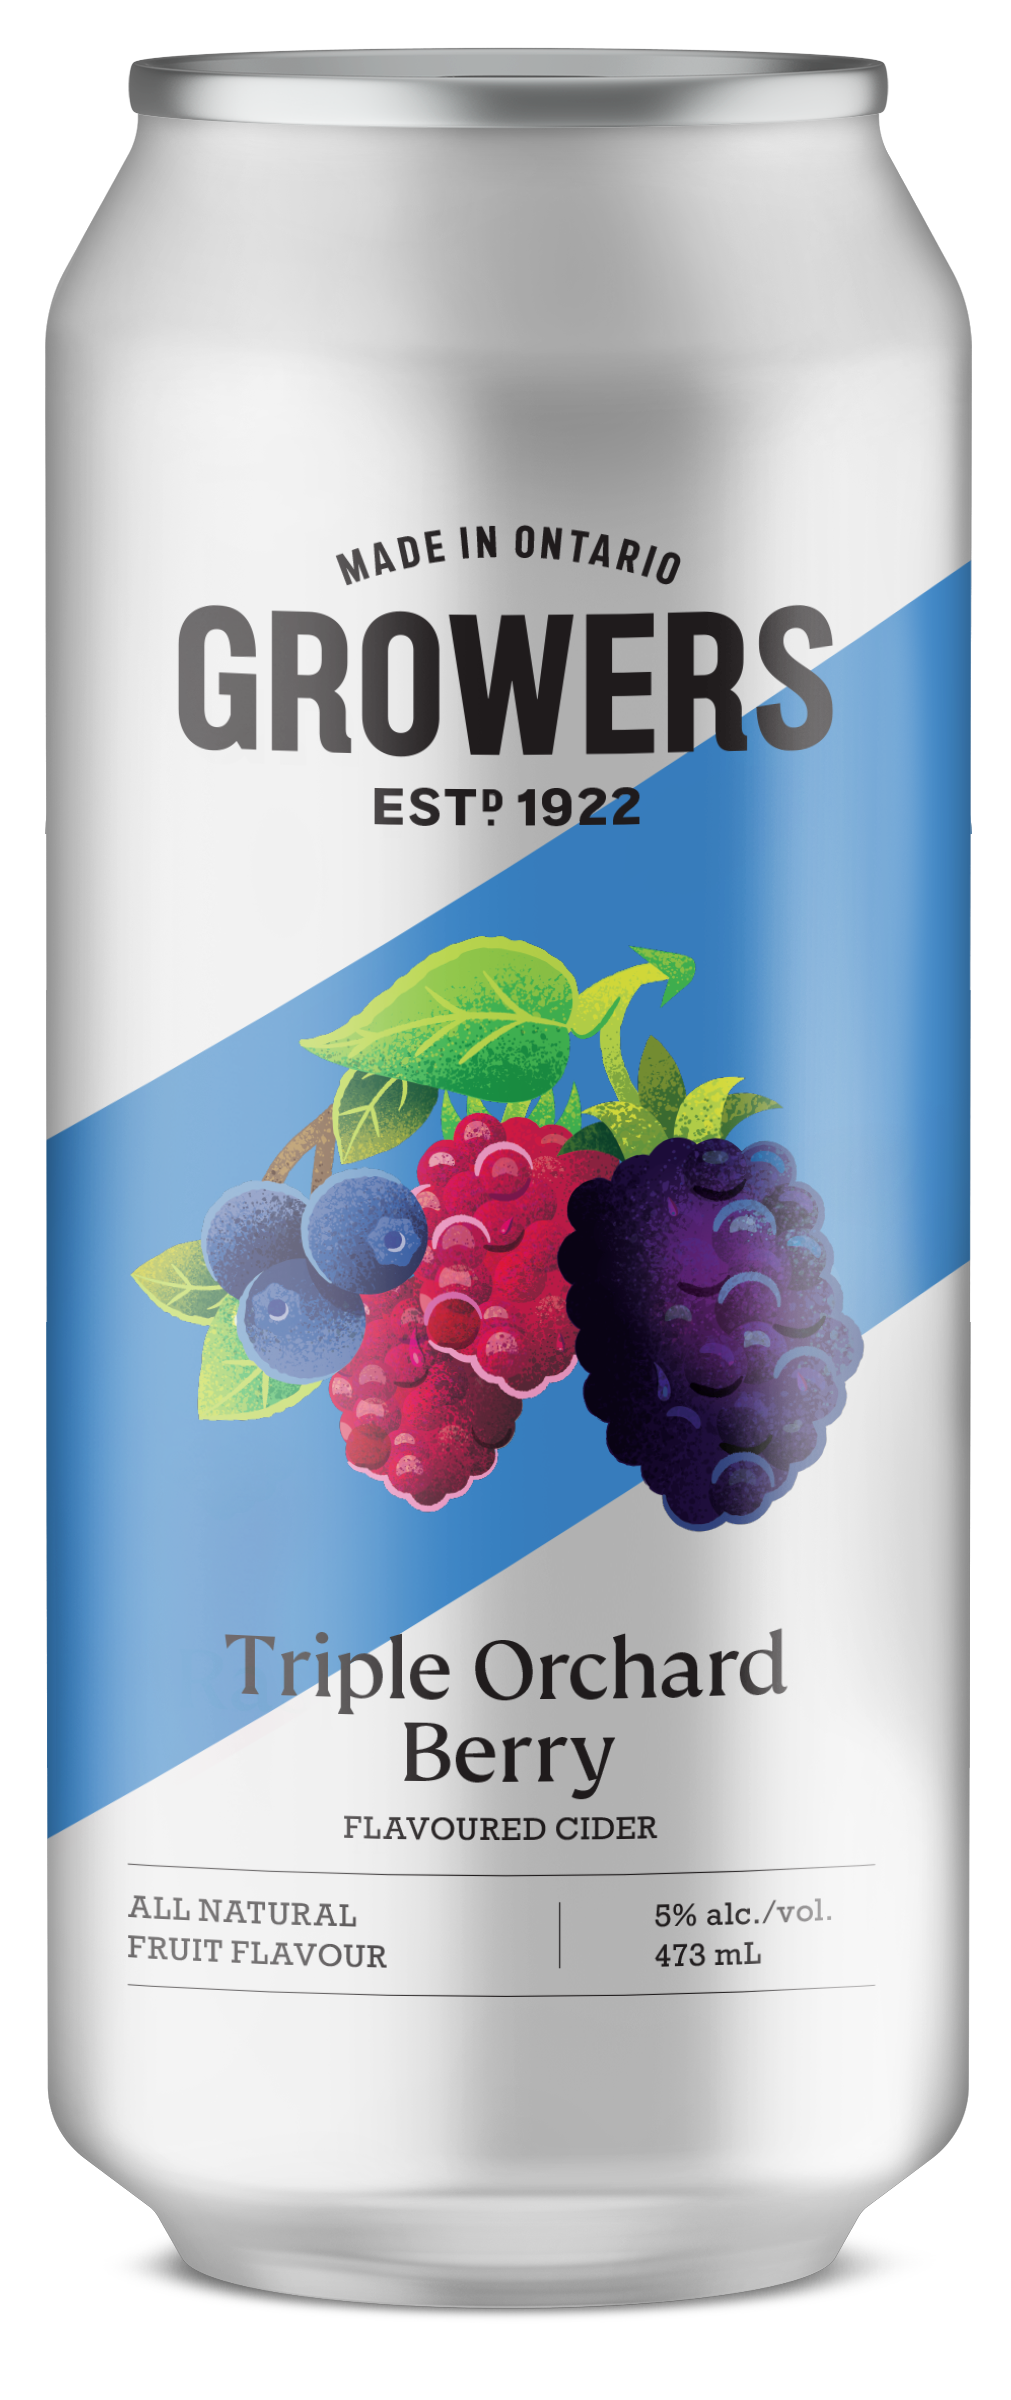 Can of Growers Triple Orchard Berry cider